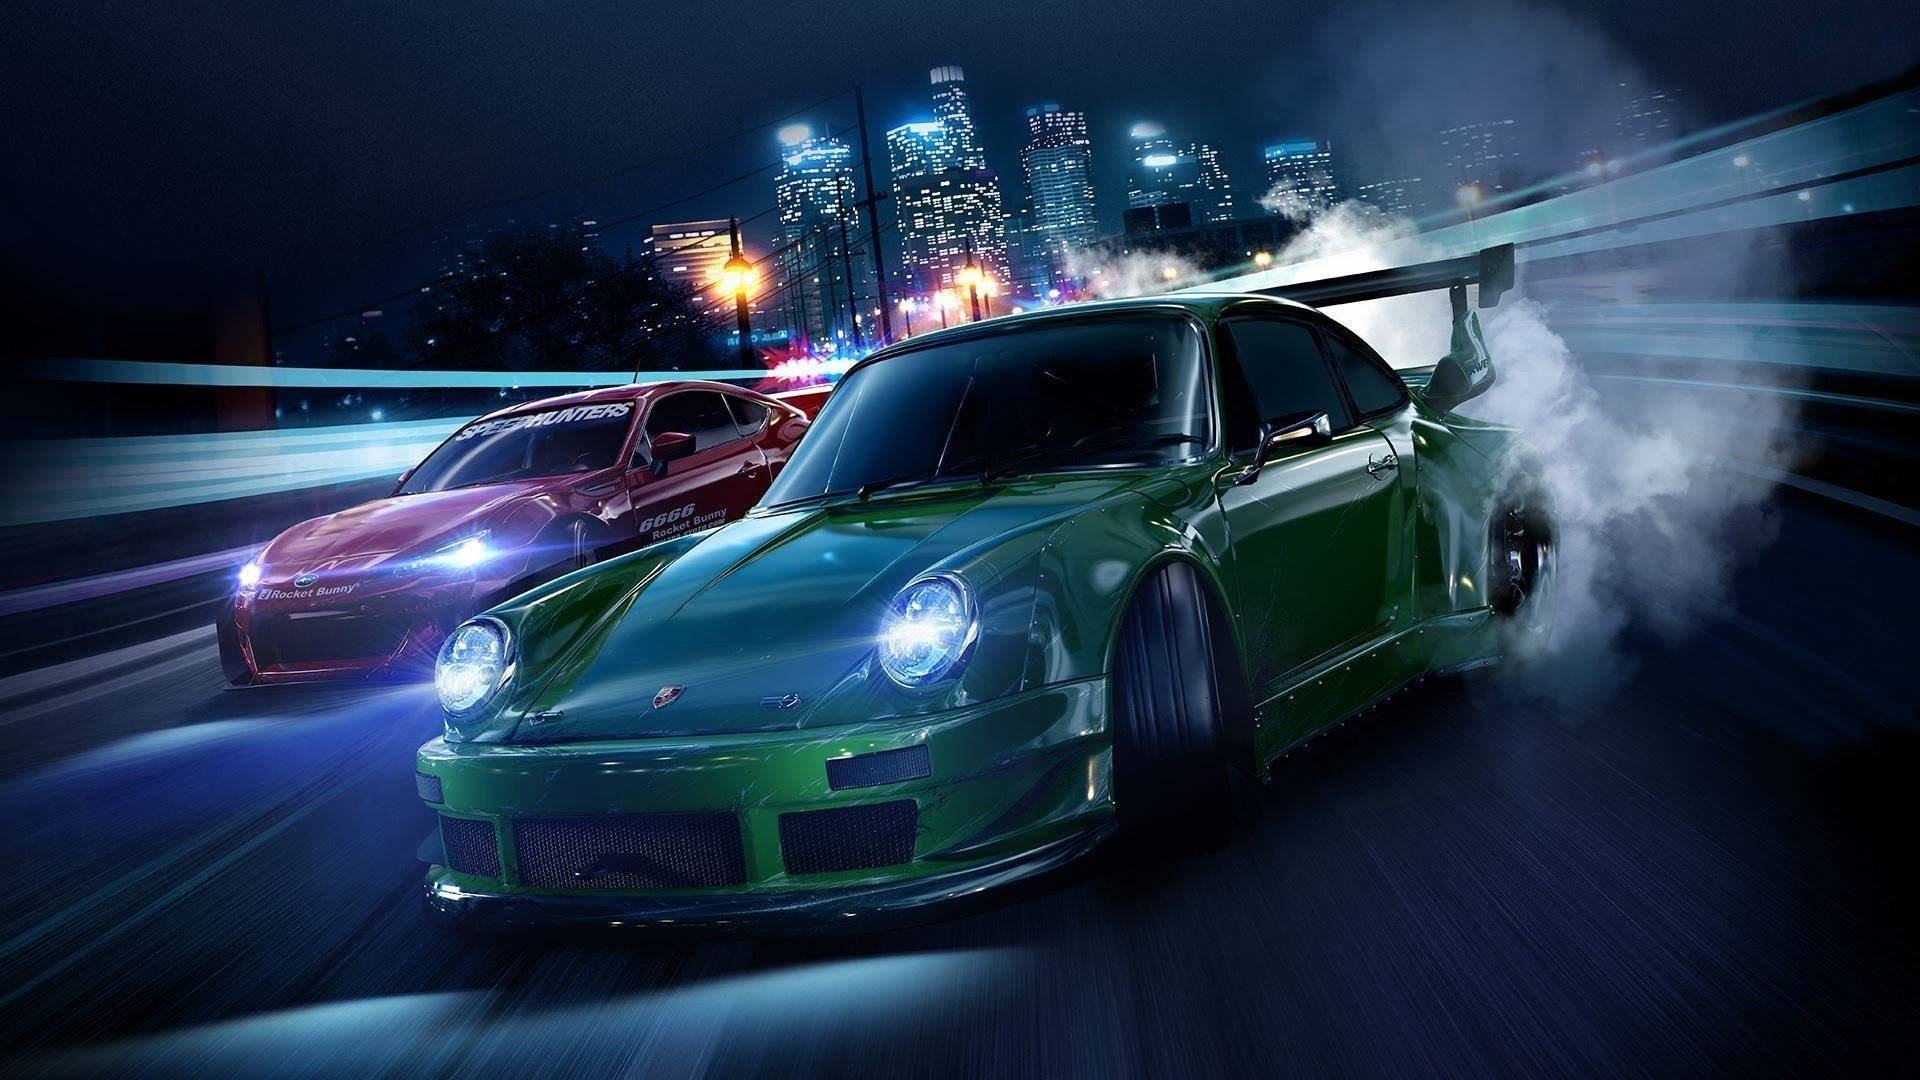 Need For Speed Most Wanted Pc Wallpaper